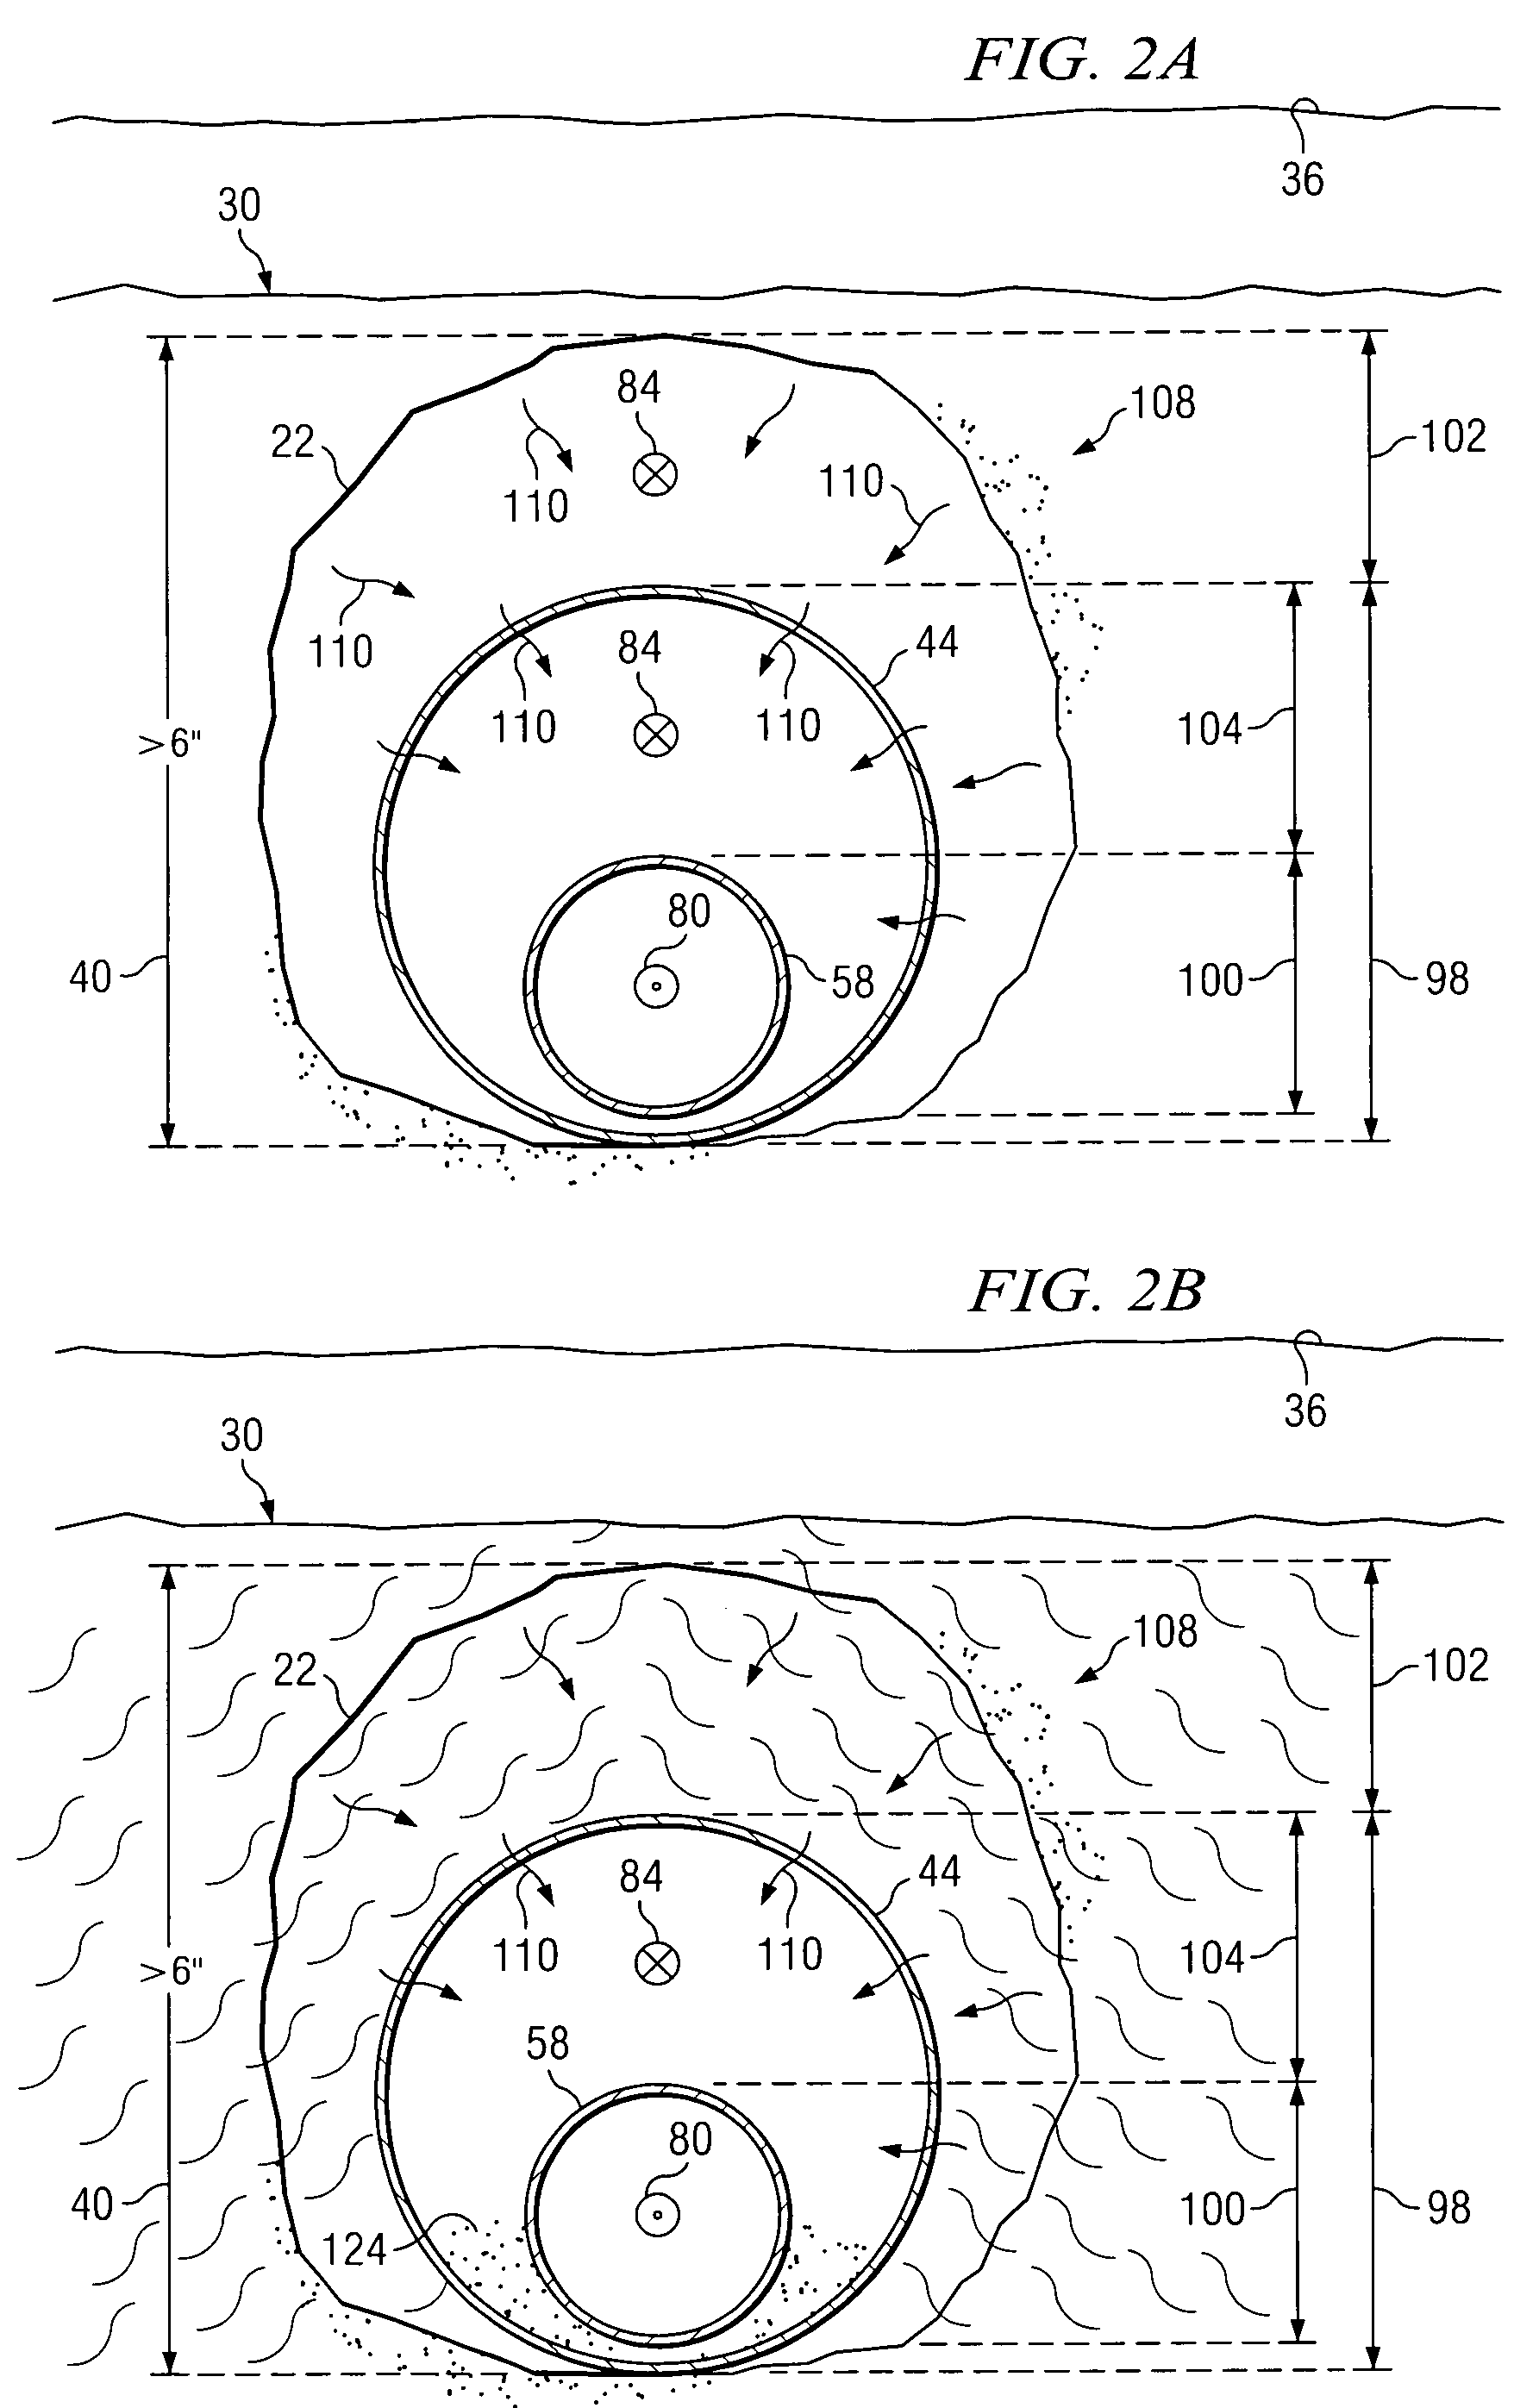 Method and system for extraction of resources from a subterranean well bore